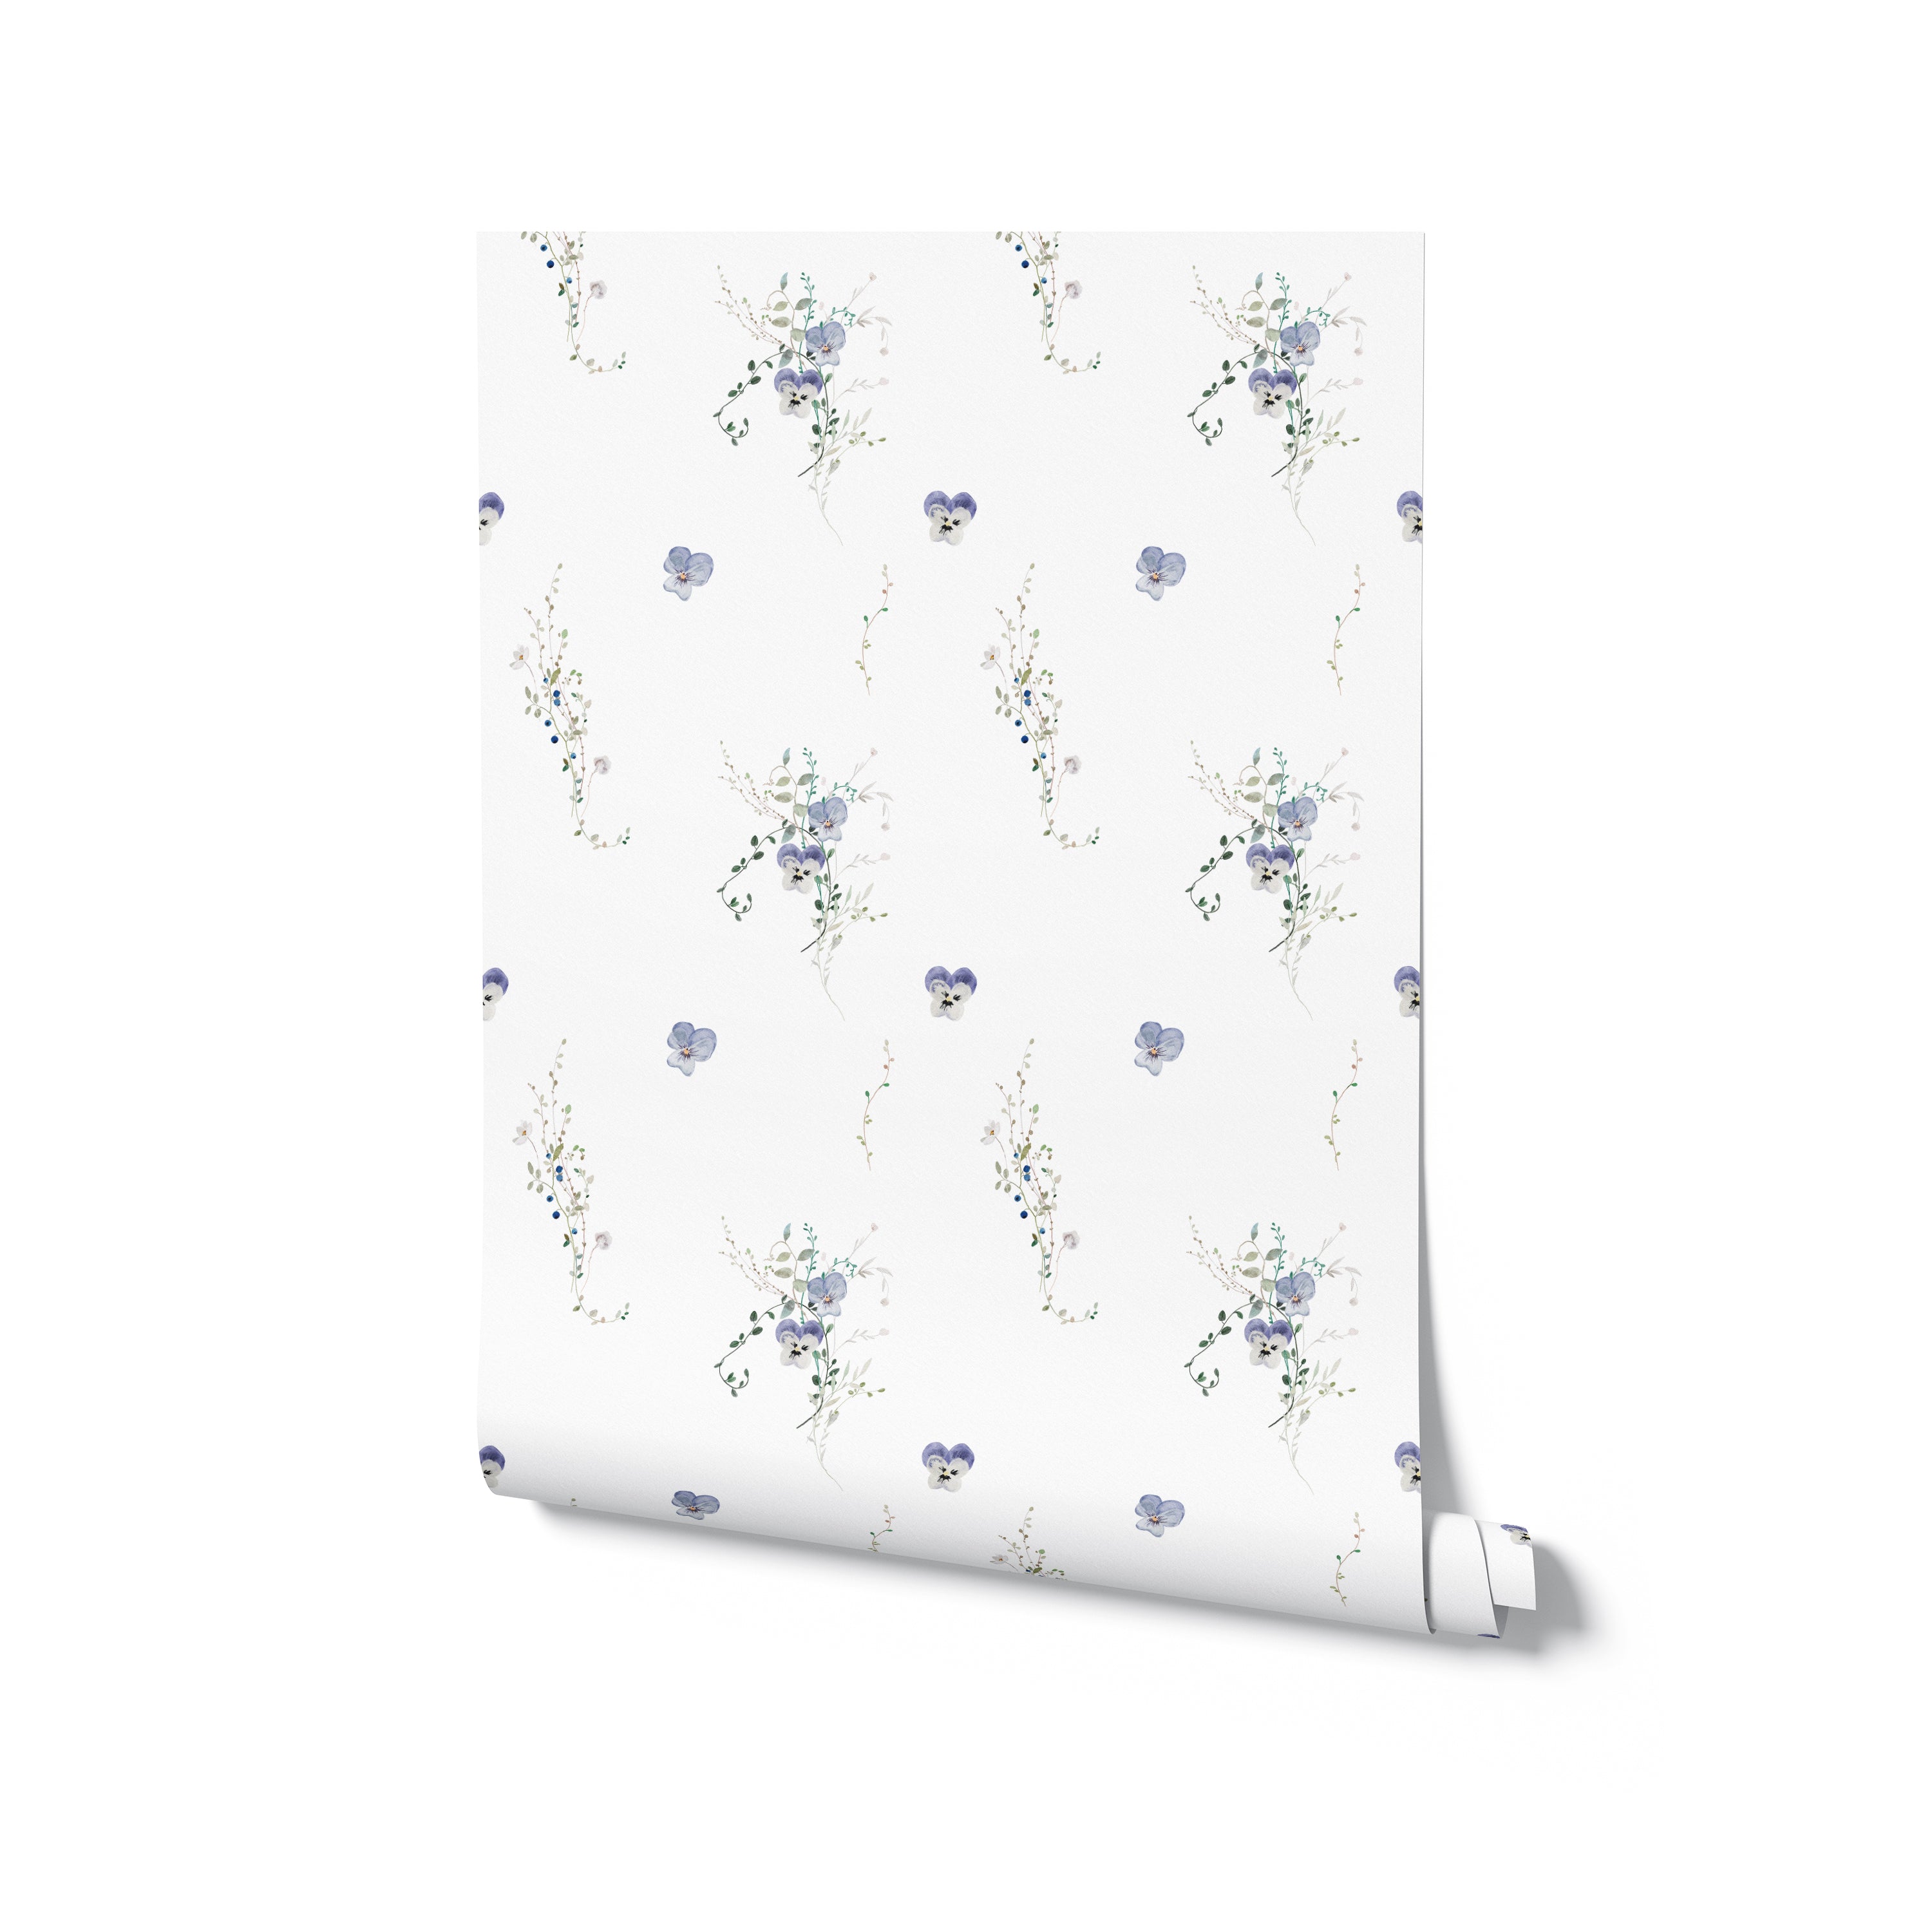 A roll of Delicate Blue Wildflower Wallpaper reveals its charming and detailed botanical print. The light background adorned with delicate blue flowers and soft green leaves offers a fresh and inviting look for a room update